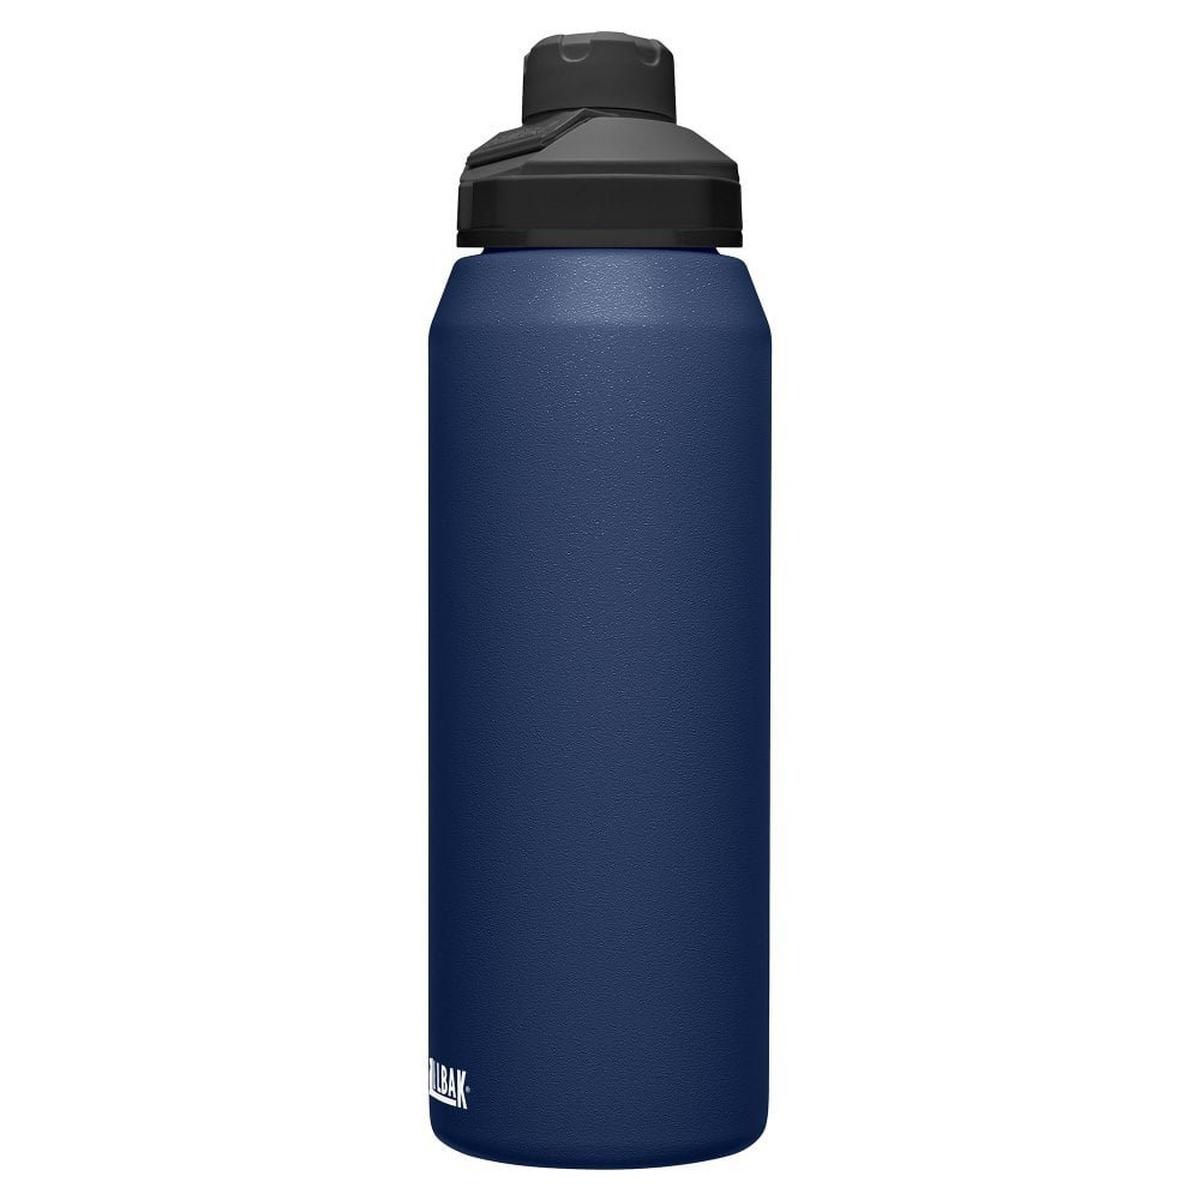 Camelbak Chute Mag Vacuum Insulated Stainless Steel 1L - Navy